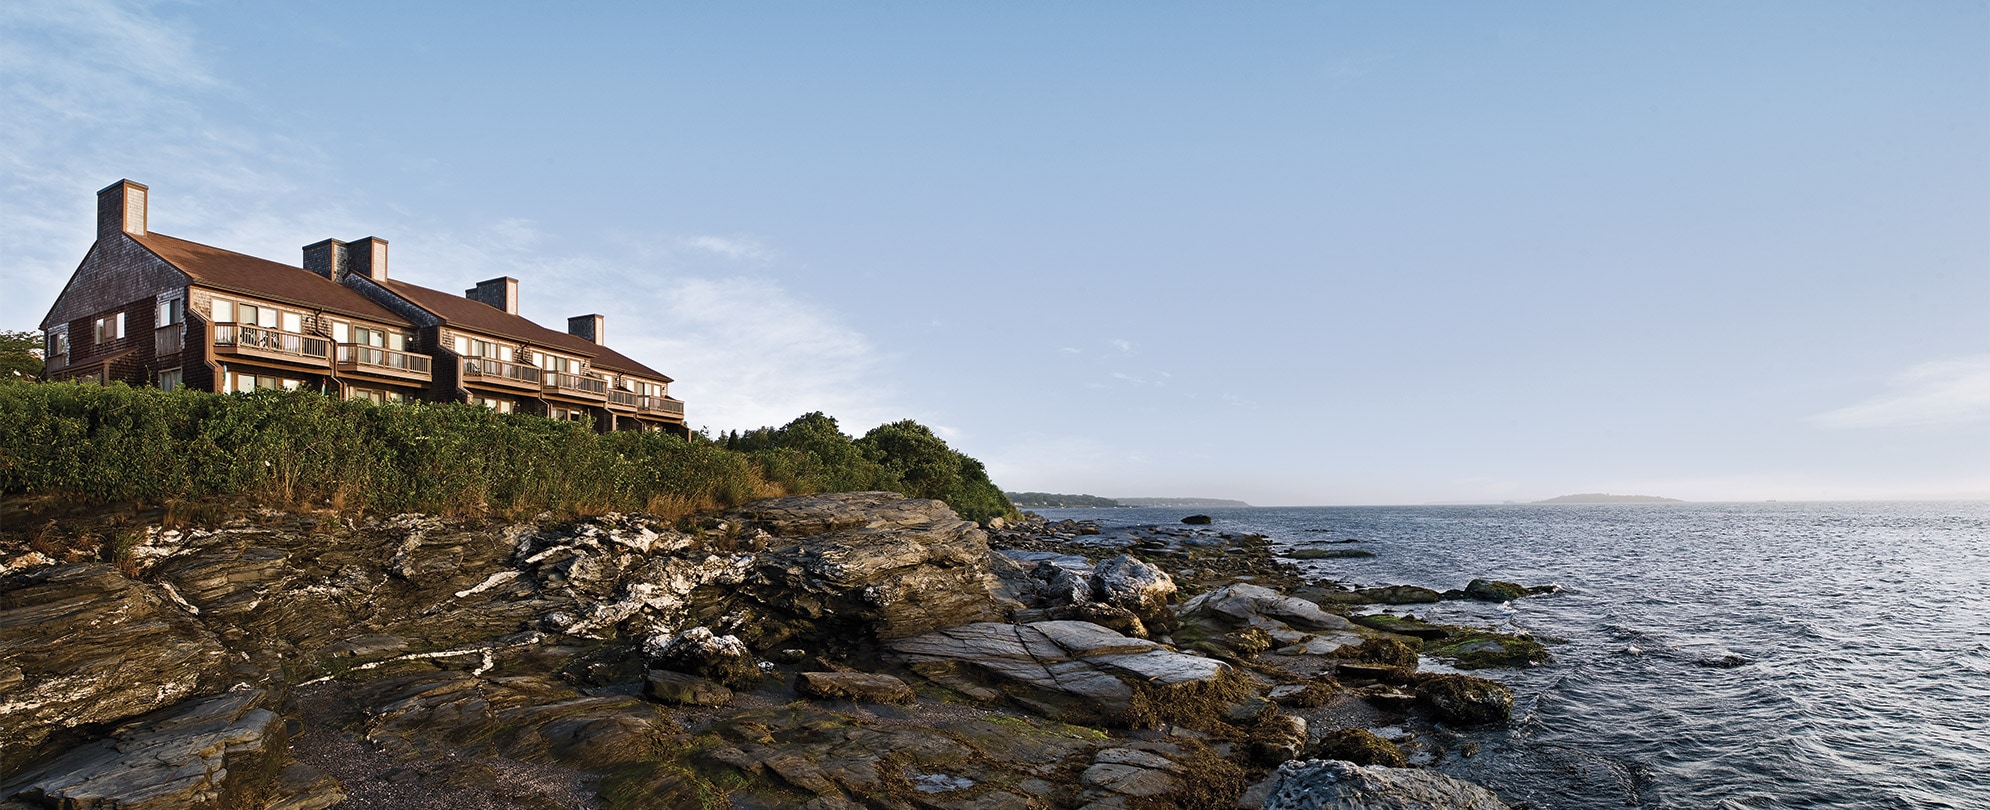 The exterior of Club Wyndham Newport Overlook, a timeshare resort in Newport, RI on a rocky shoreline.